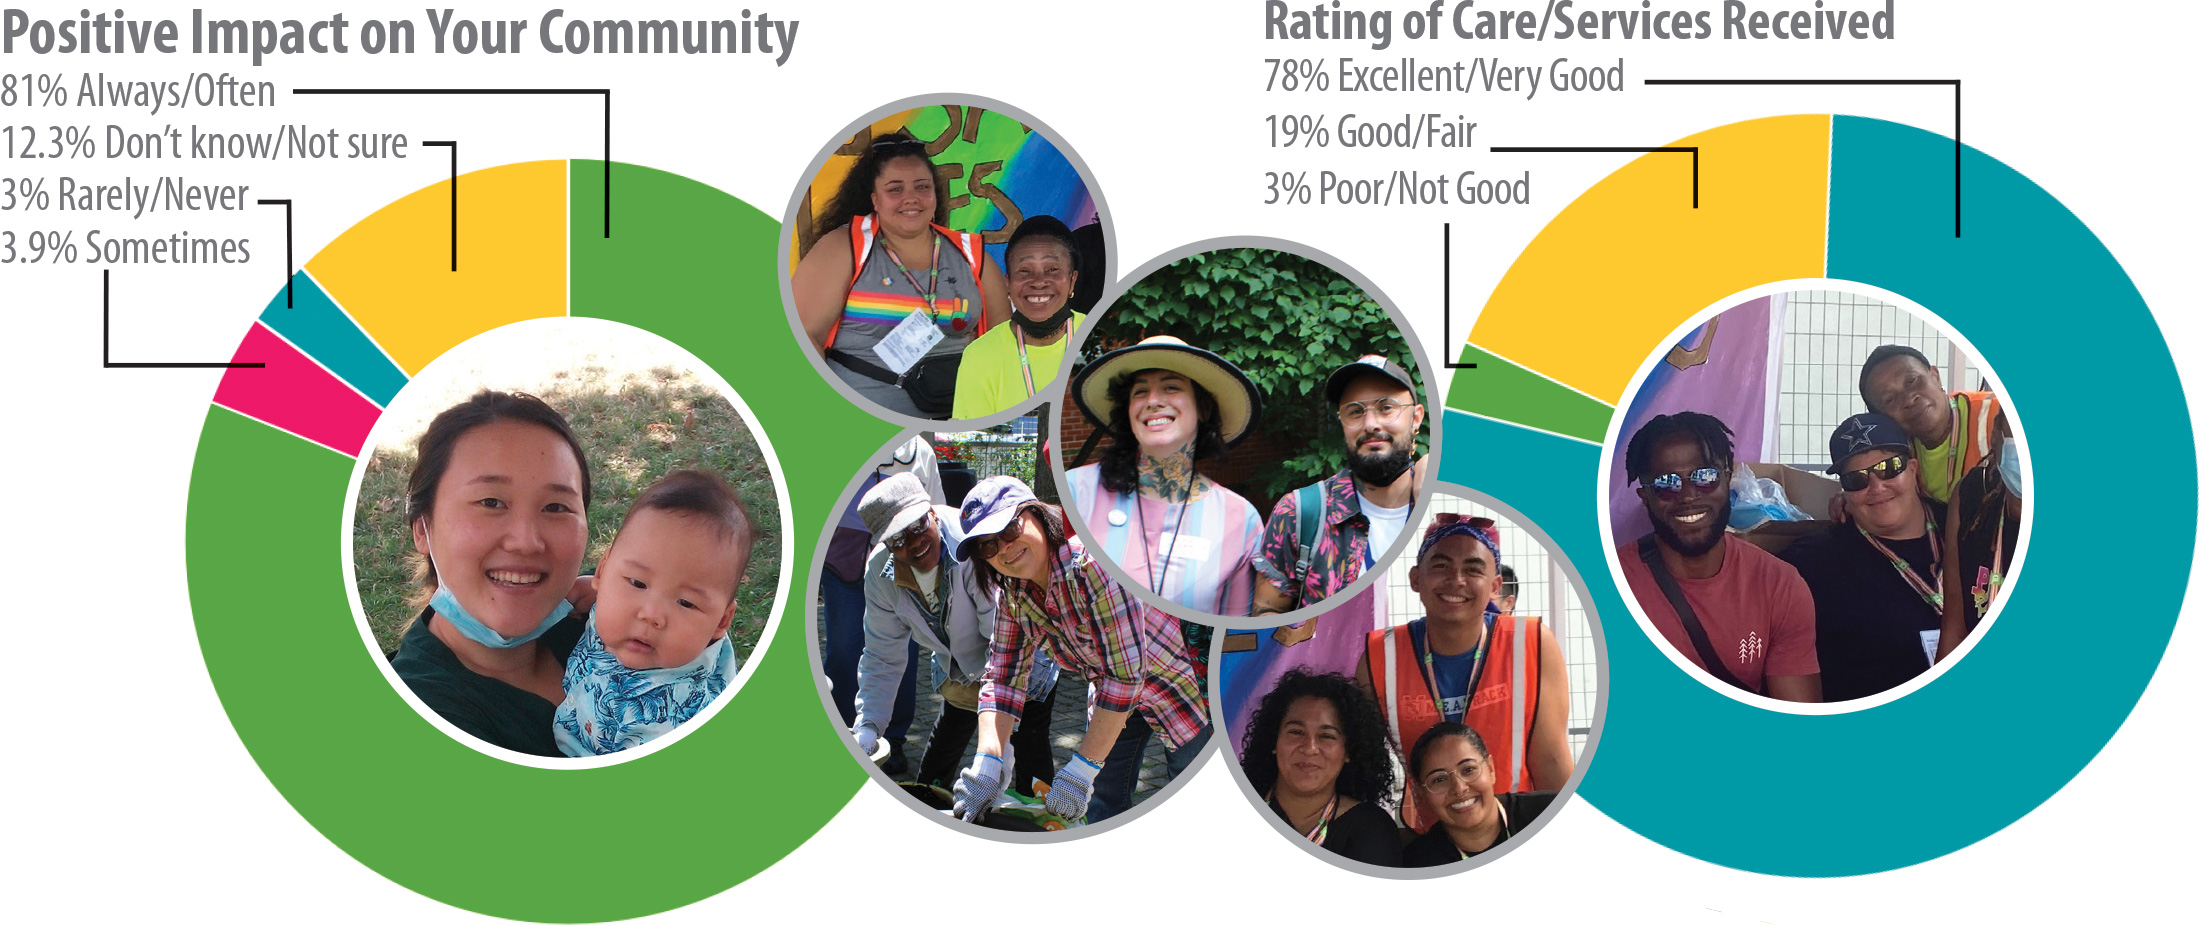 Positive Impact on Your Community—81% Always/Often, 12.3% Don’t know/Not sure, 3% Rarely/Never, 3.9% Sometimes | Rating of Care/Services Received—78% Excellent/Very Good, 19% Good/Fair, 3% Poor/Not Good